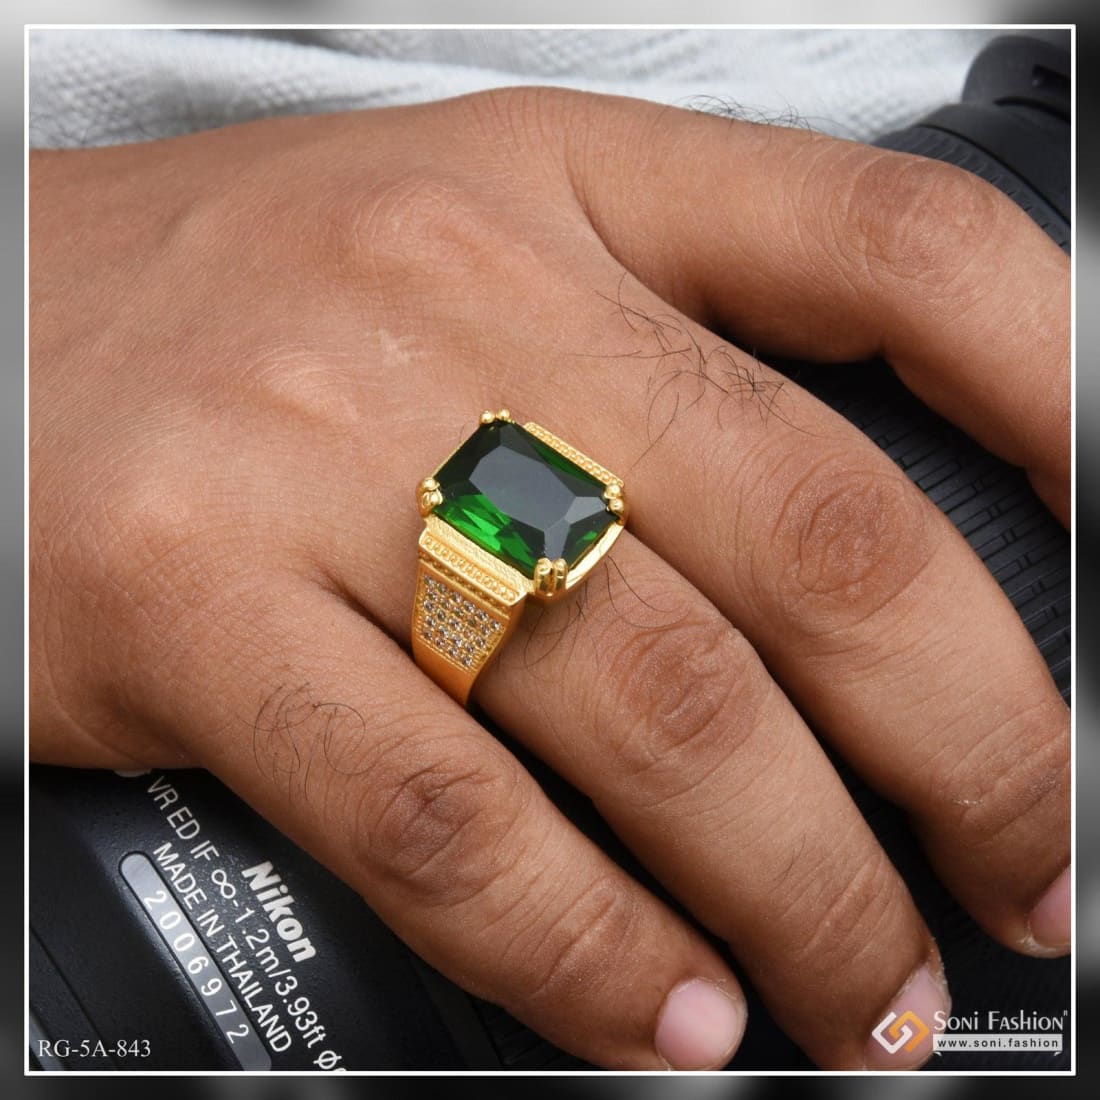 Owal Shape Green Stone With Diamond Glittering Design Gold Plated Ring -  Style A852 - Soni Fashion at Rs 700.00, Rajkot | ID: 2851124025788